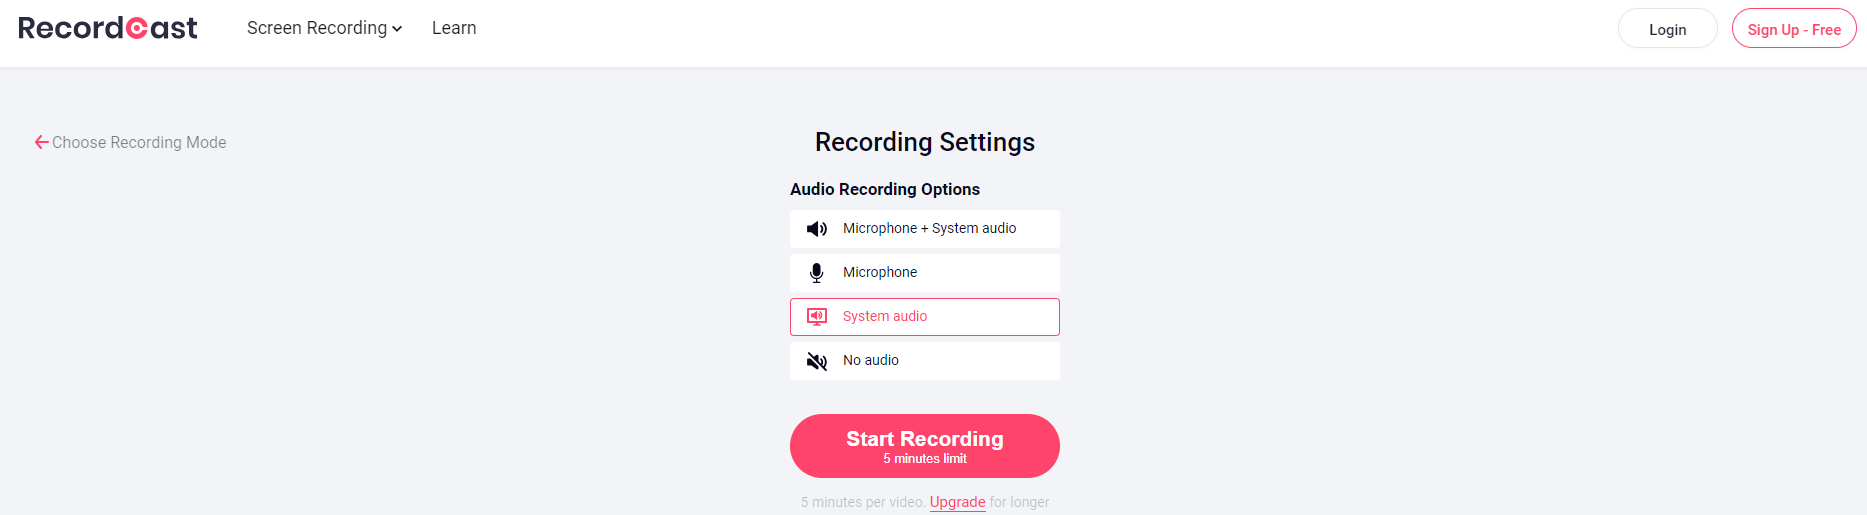 Screen record on Windows 10 with audio using RecordCast step 3